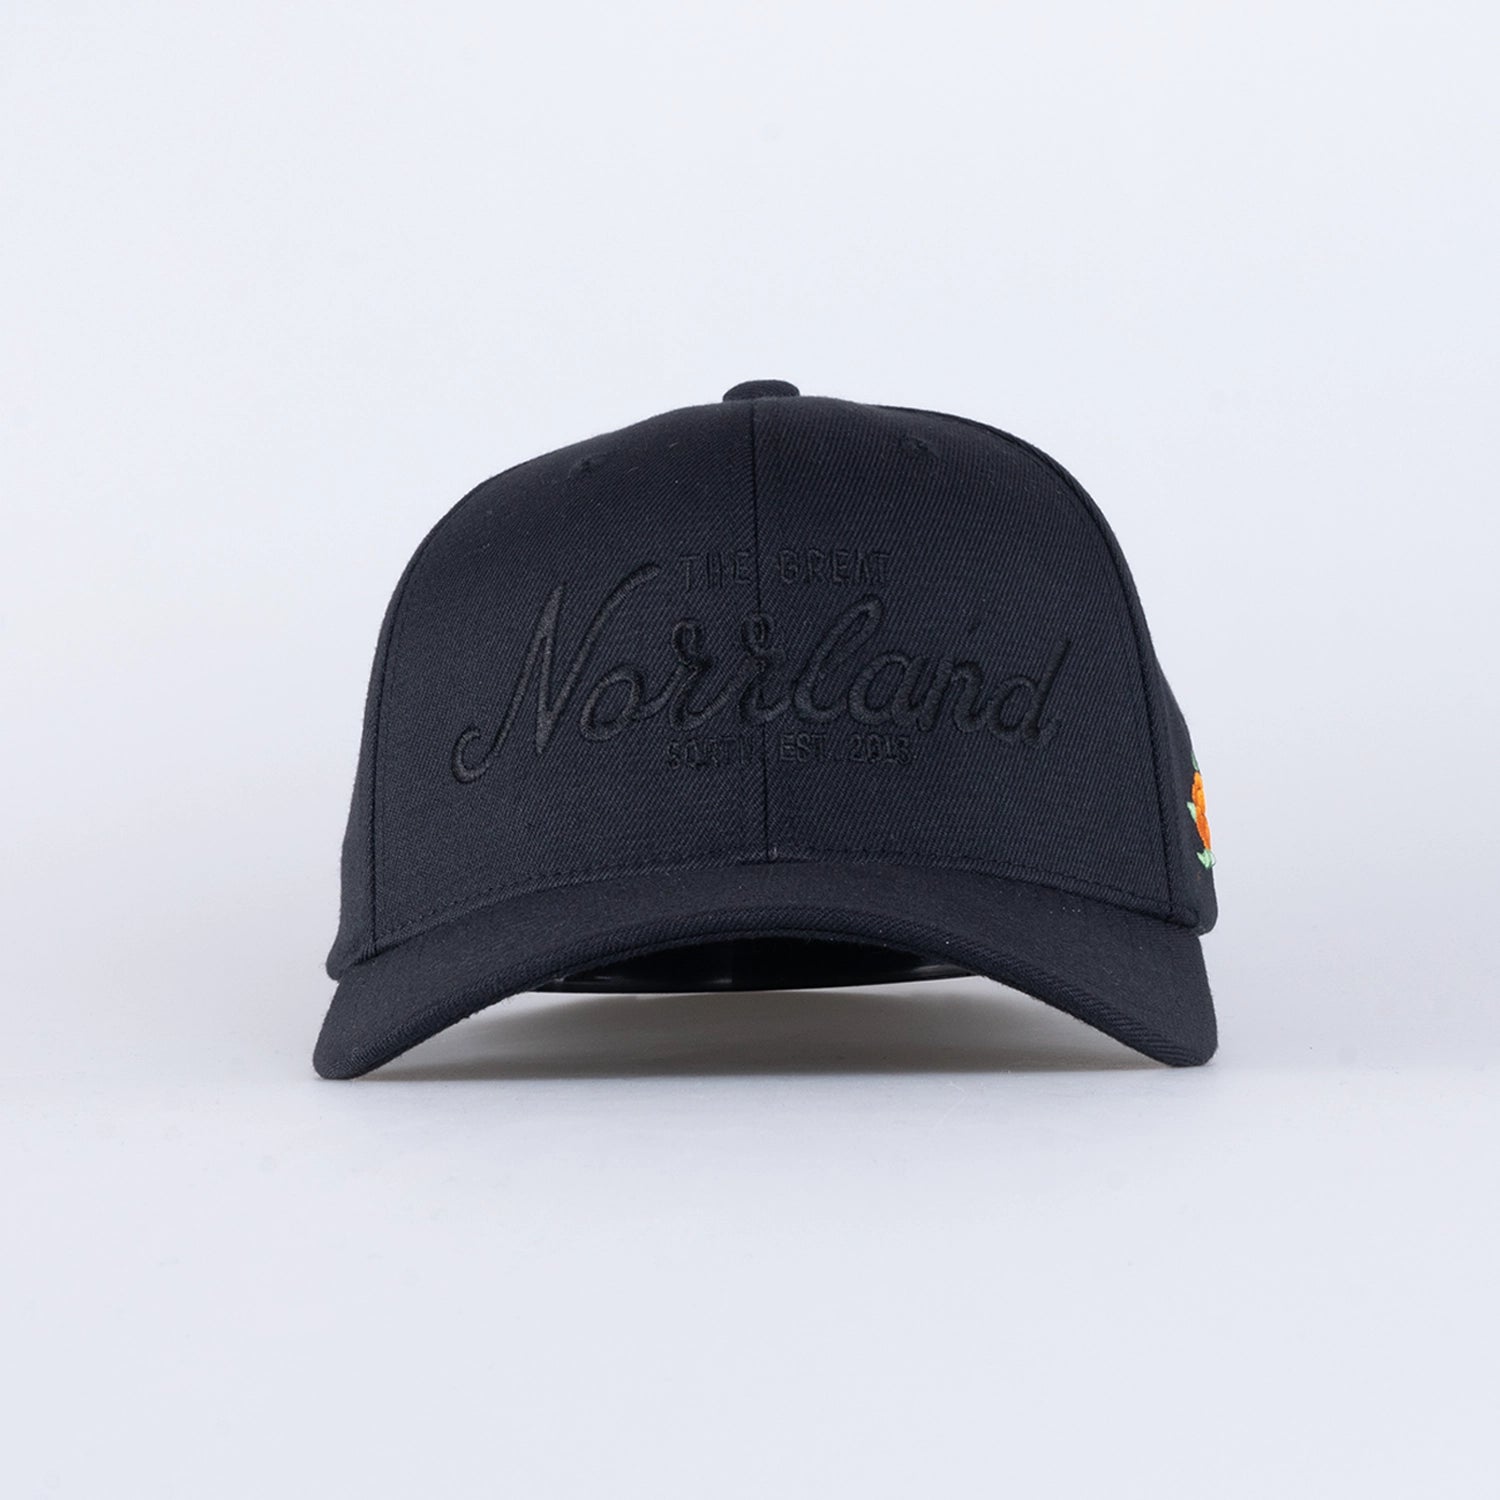 GREAT NORRLAND 120 KEPS - ALL BLACK